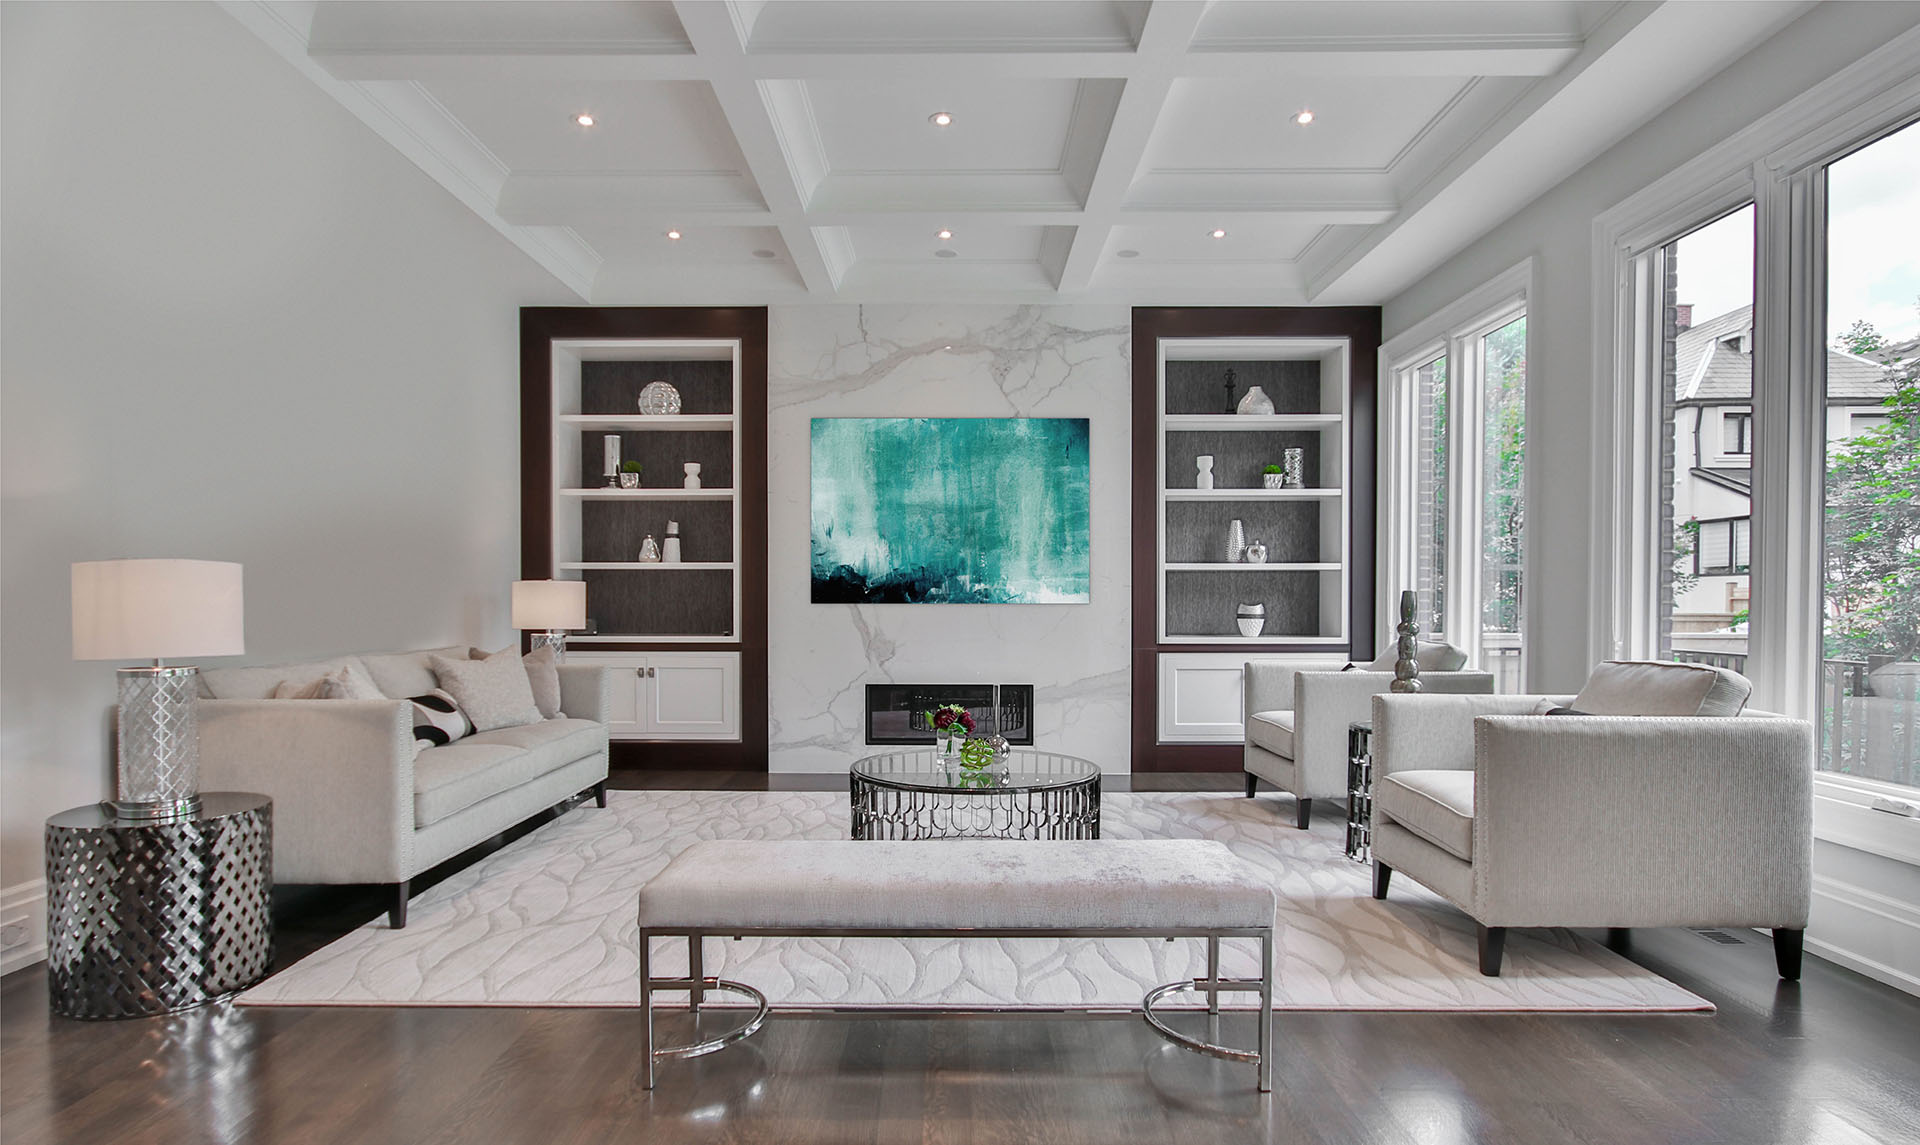 Stylized sitting room boasting hardwood floors, waffled ceiling, large windows, and a calming neutral colour scheme.